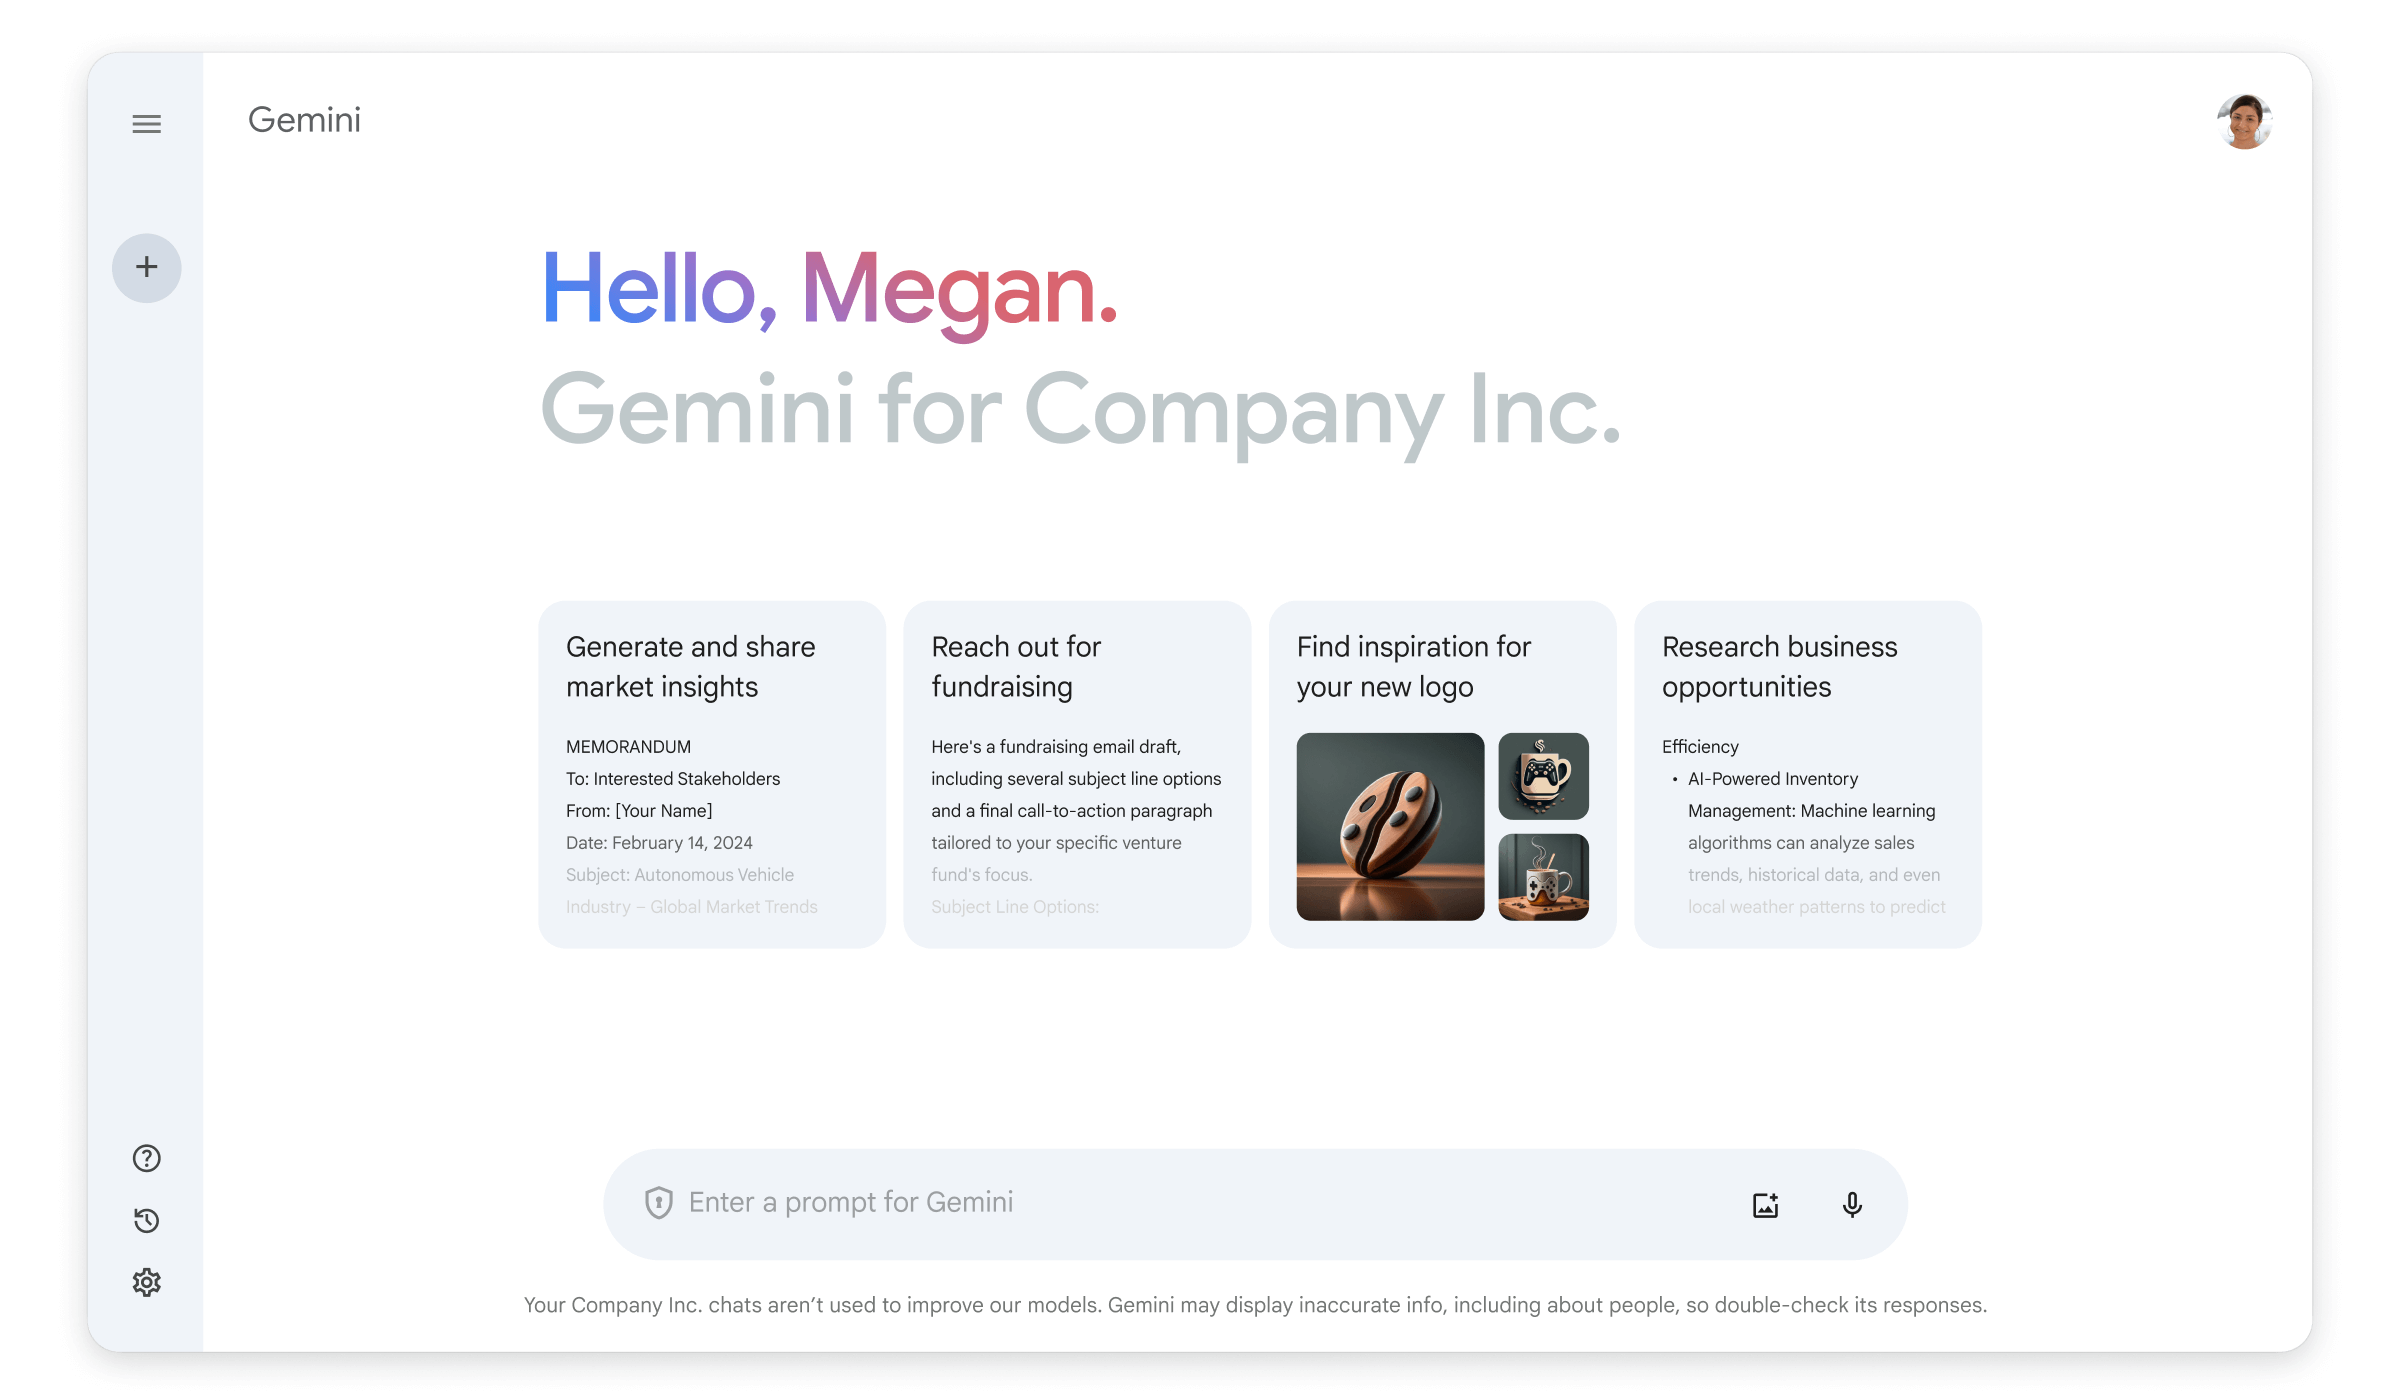 A screen says "Hello, Megan" with "Gemini for Company Inc." underneath and options like "Generate and share market insights" and "Find inspiration for your new logo."